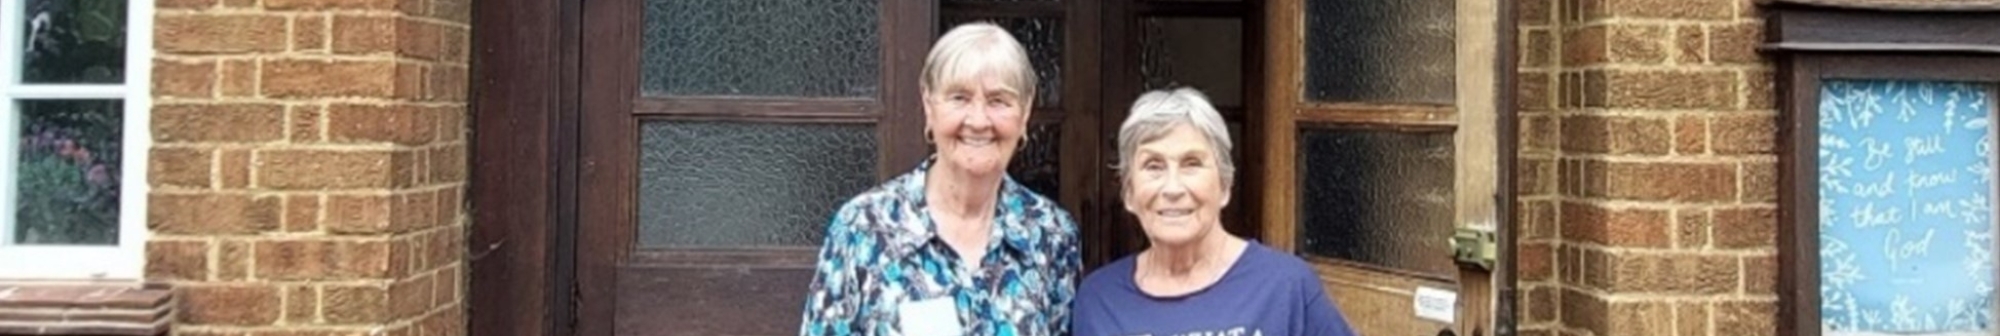 jo-and-sally-stand-together-outside-community-hub